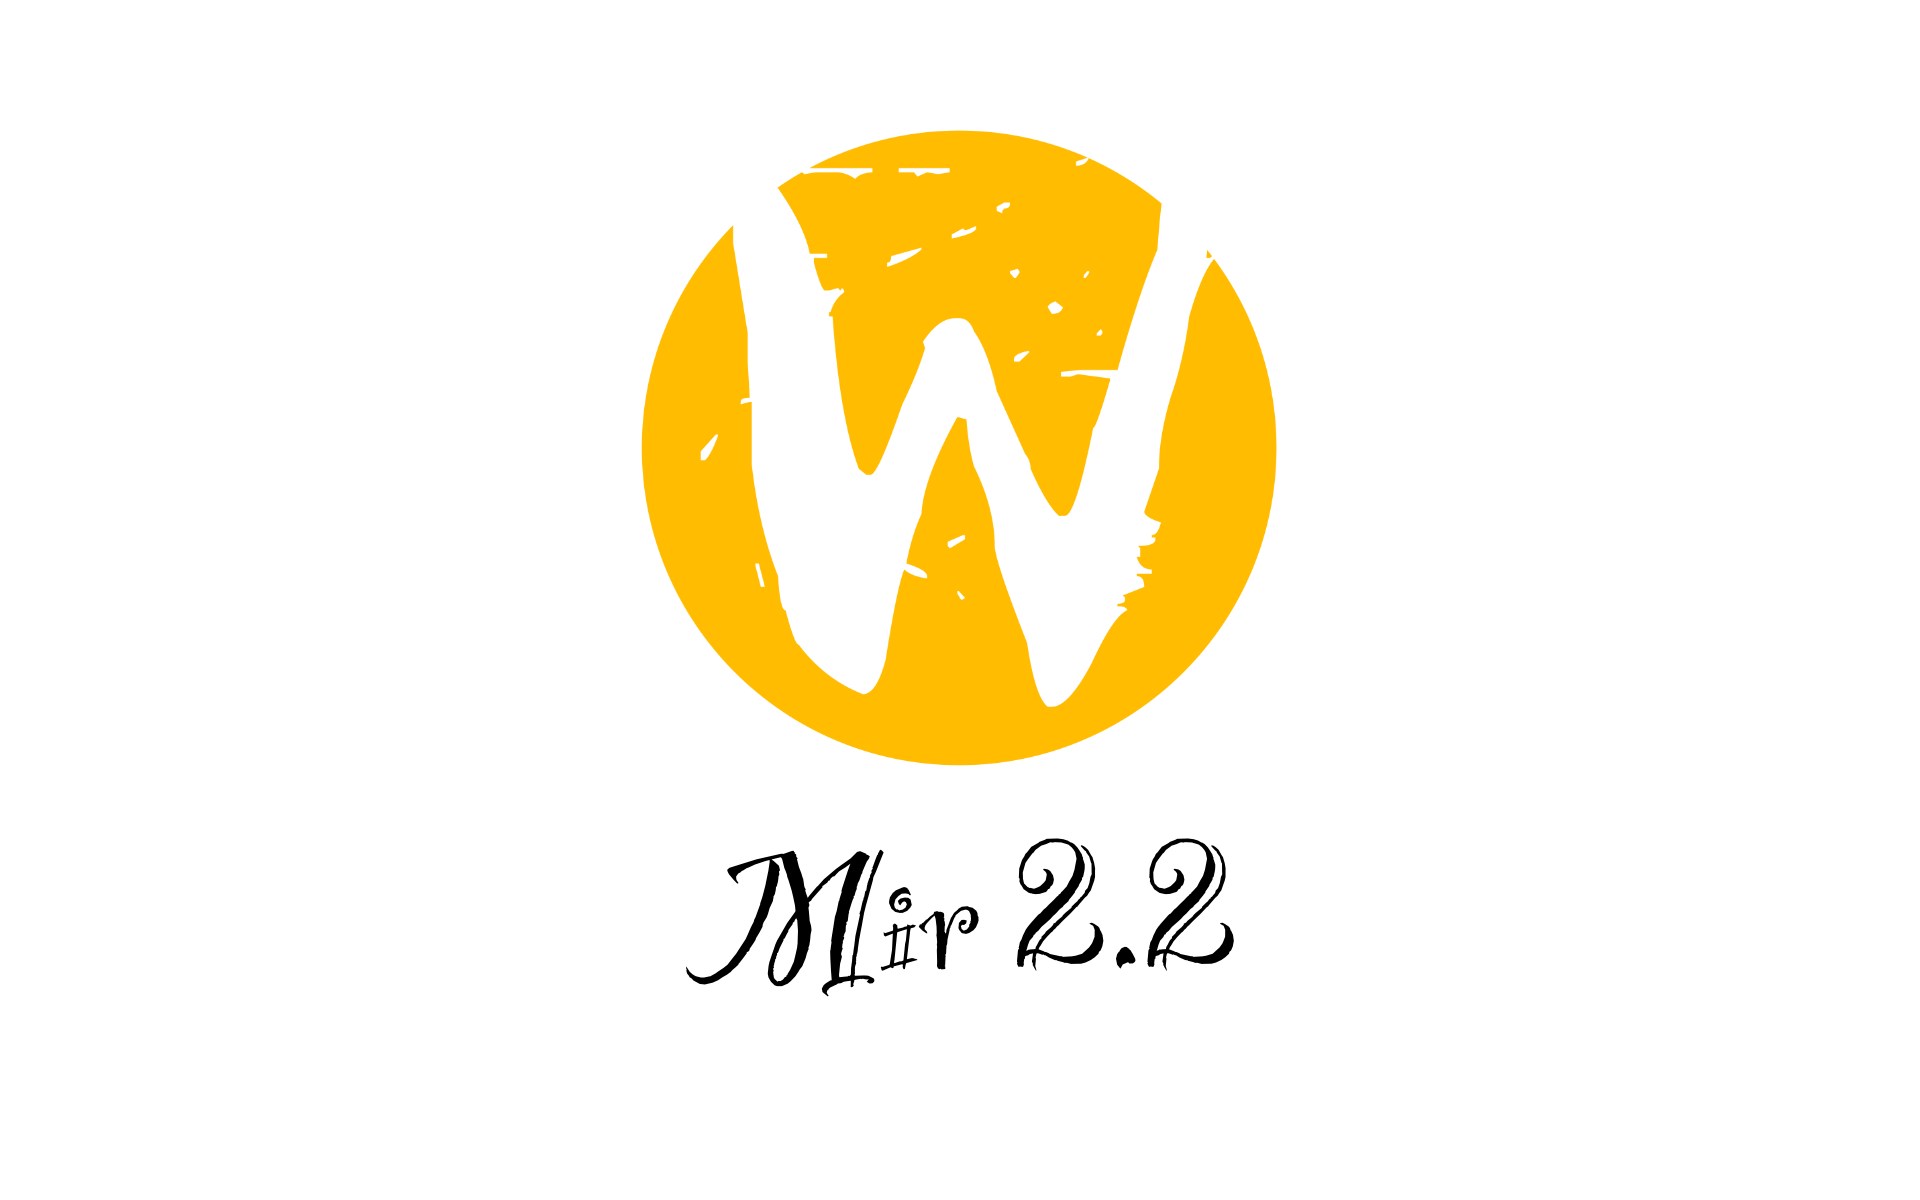 Mir 2.2 Released with Support for Software Buffers on X11, Wayland, and GBM/KMS